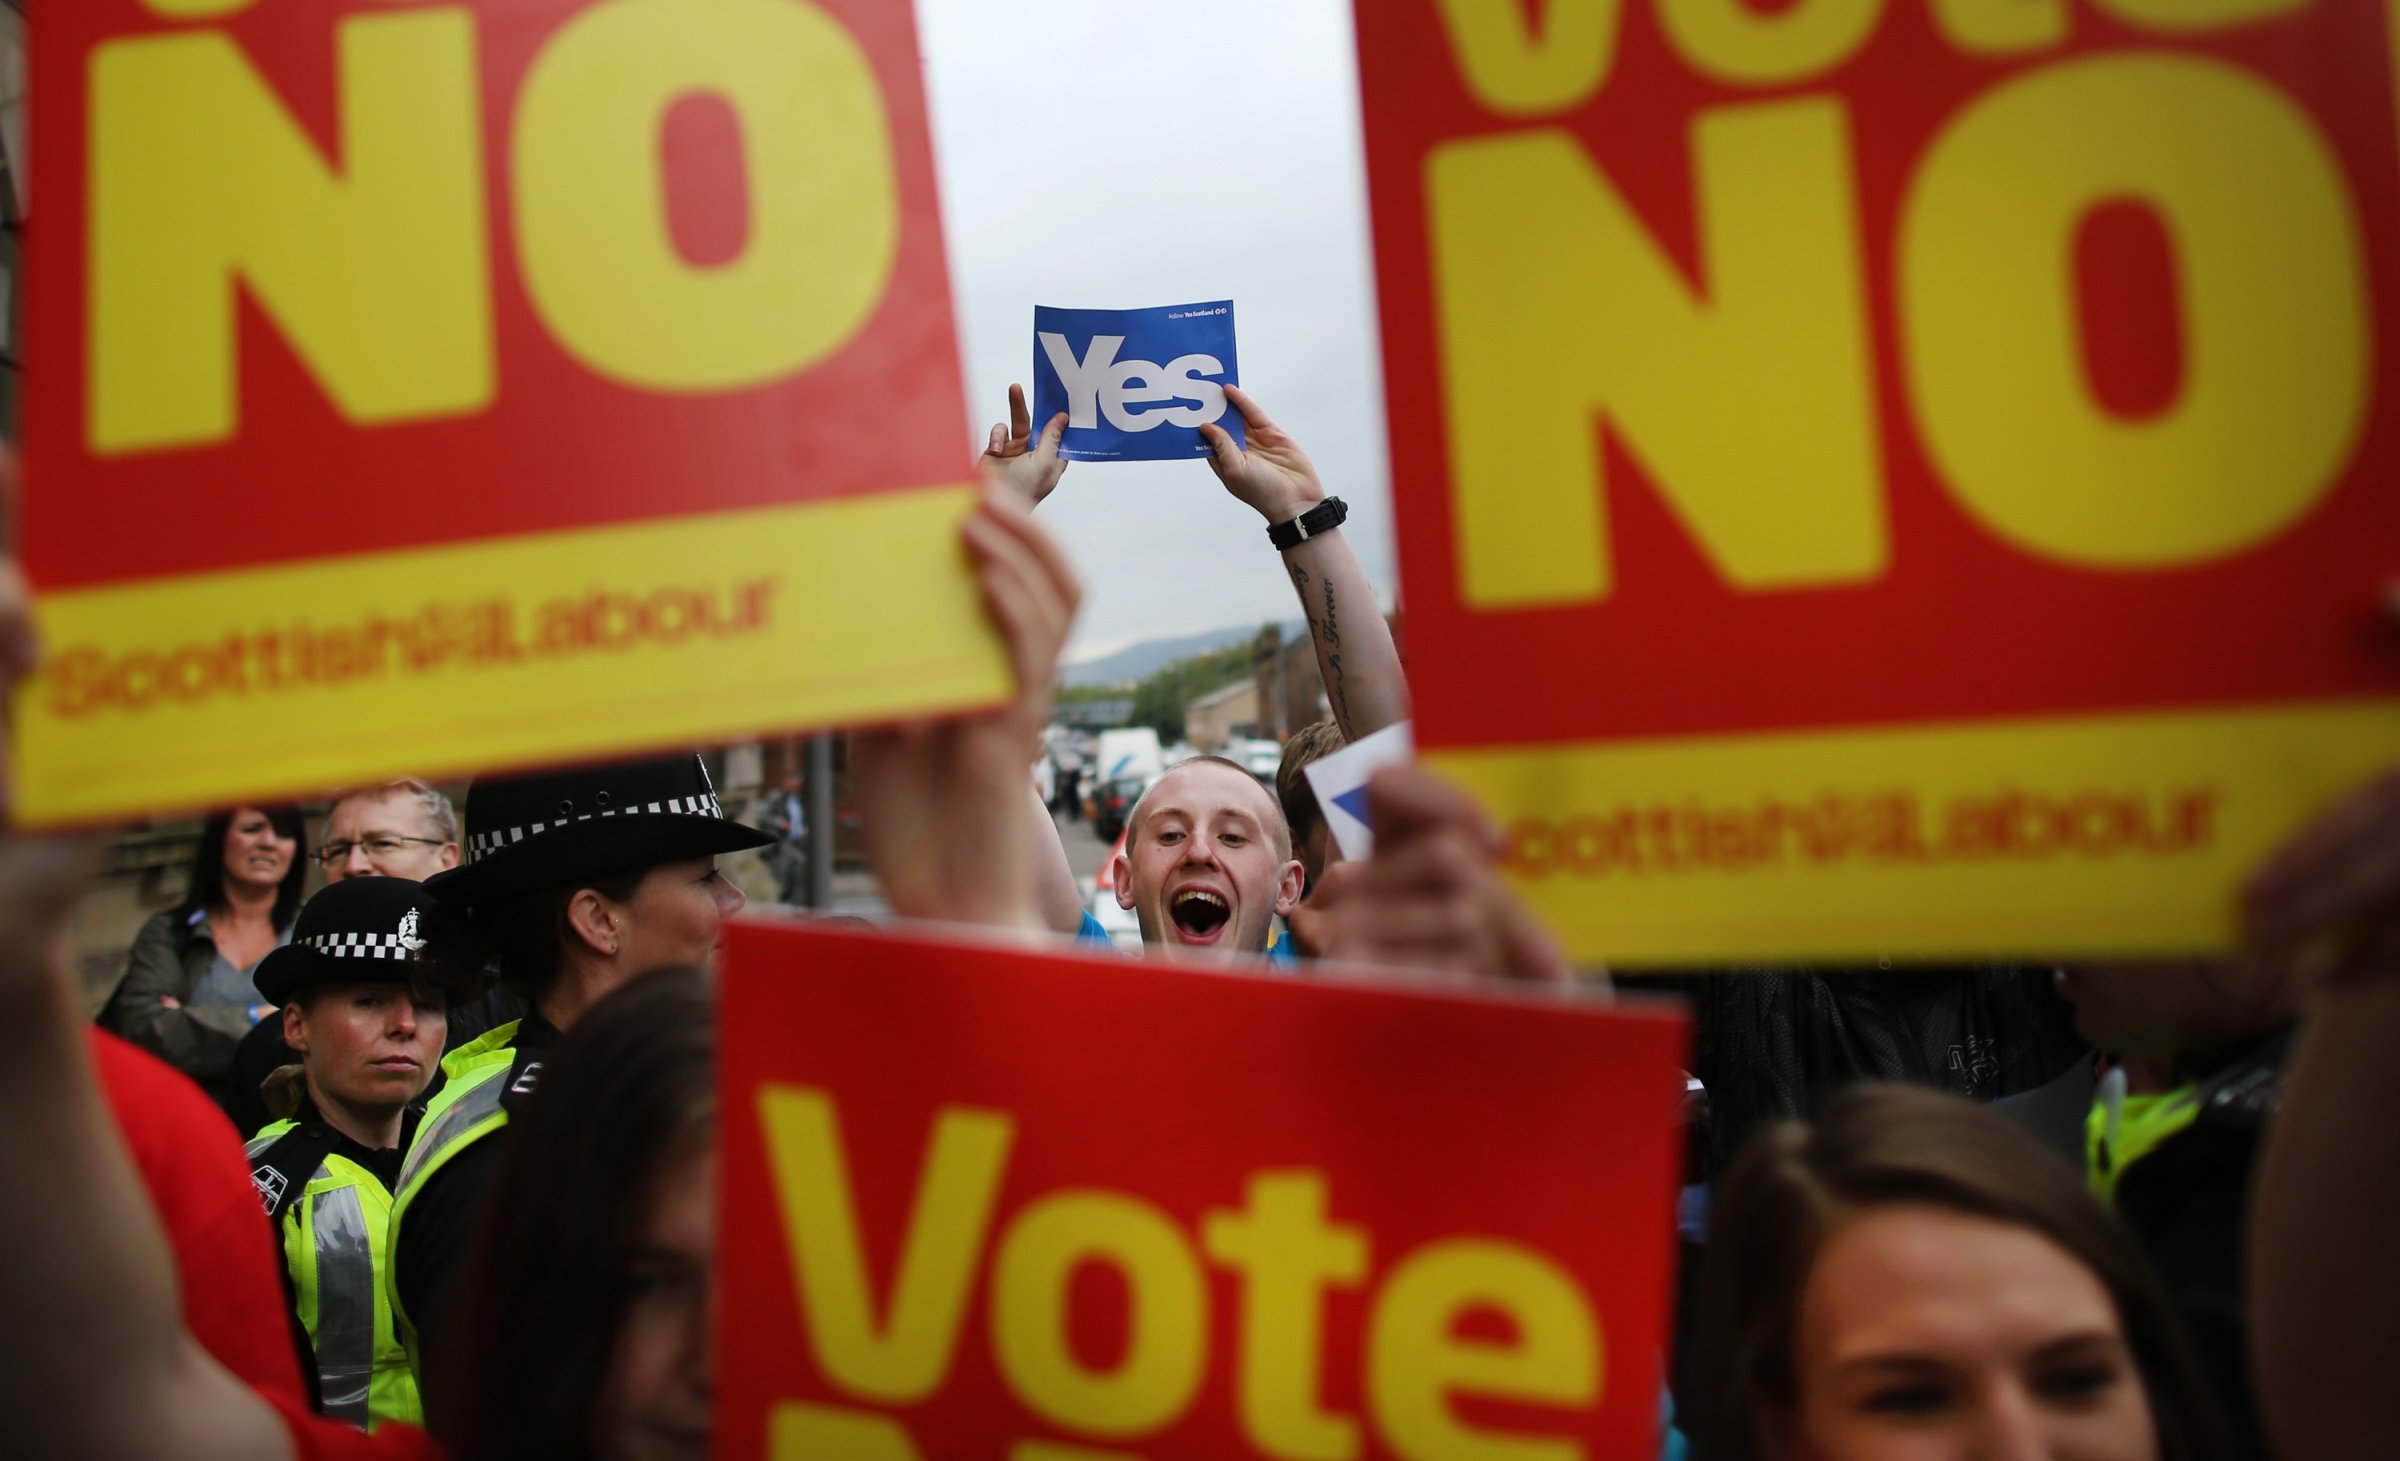 Scottish Referendum Debate Continues As Vote Is Too Close To Call